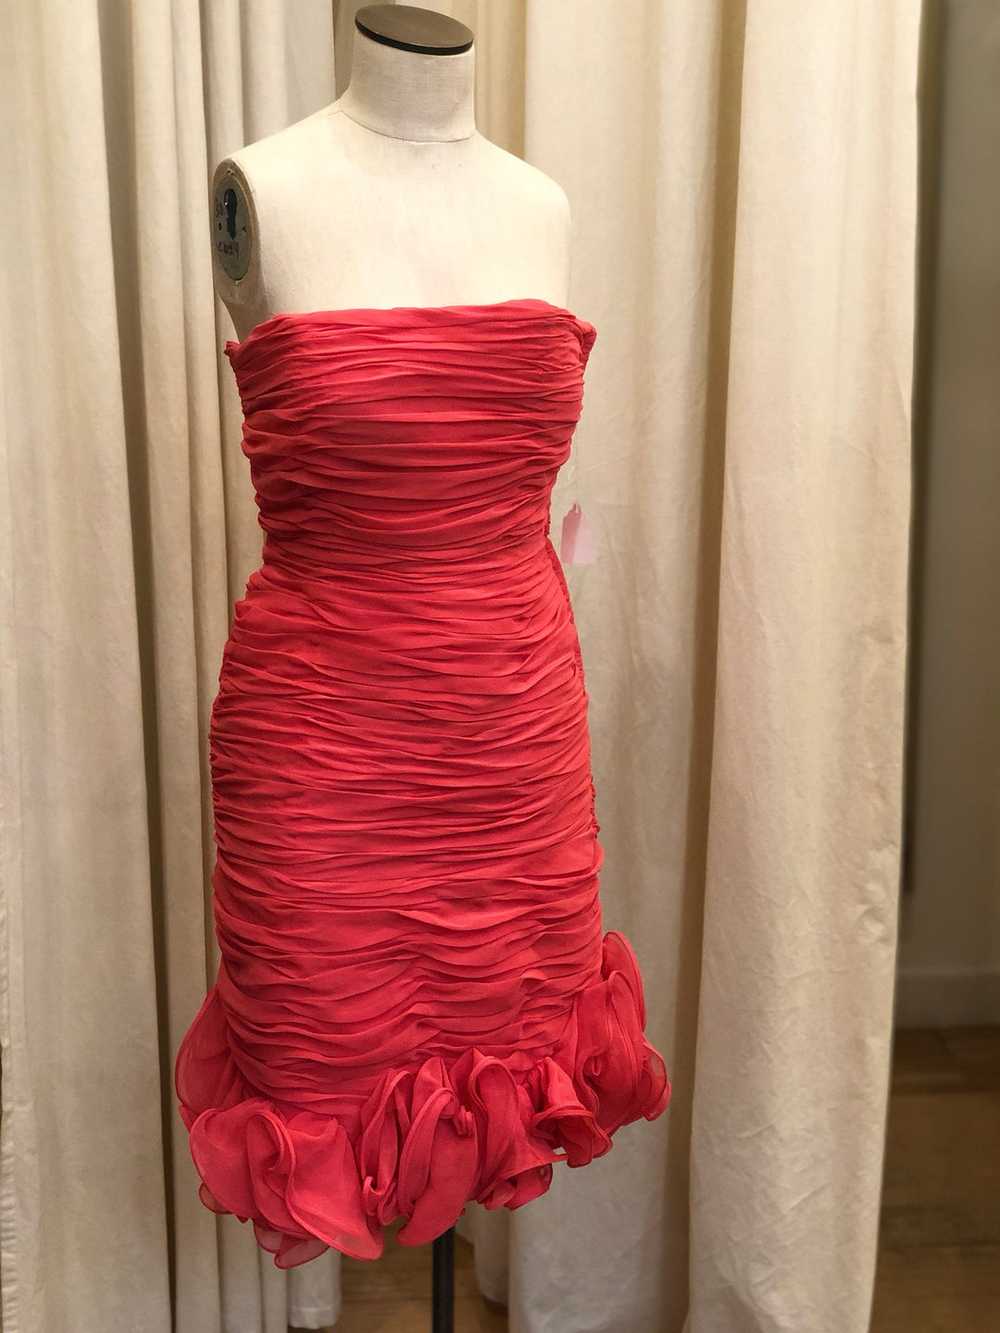 1980's Lillie Rubin Ruched Coral Dress - image 1